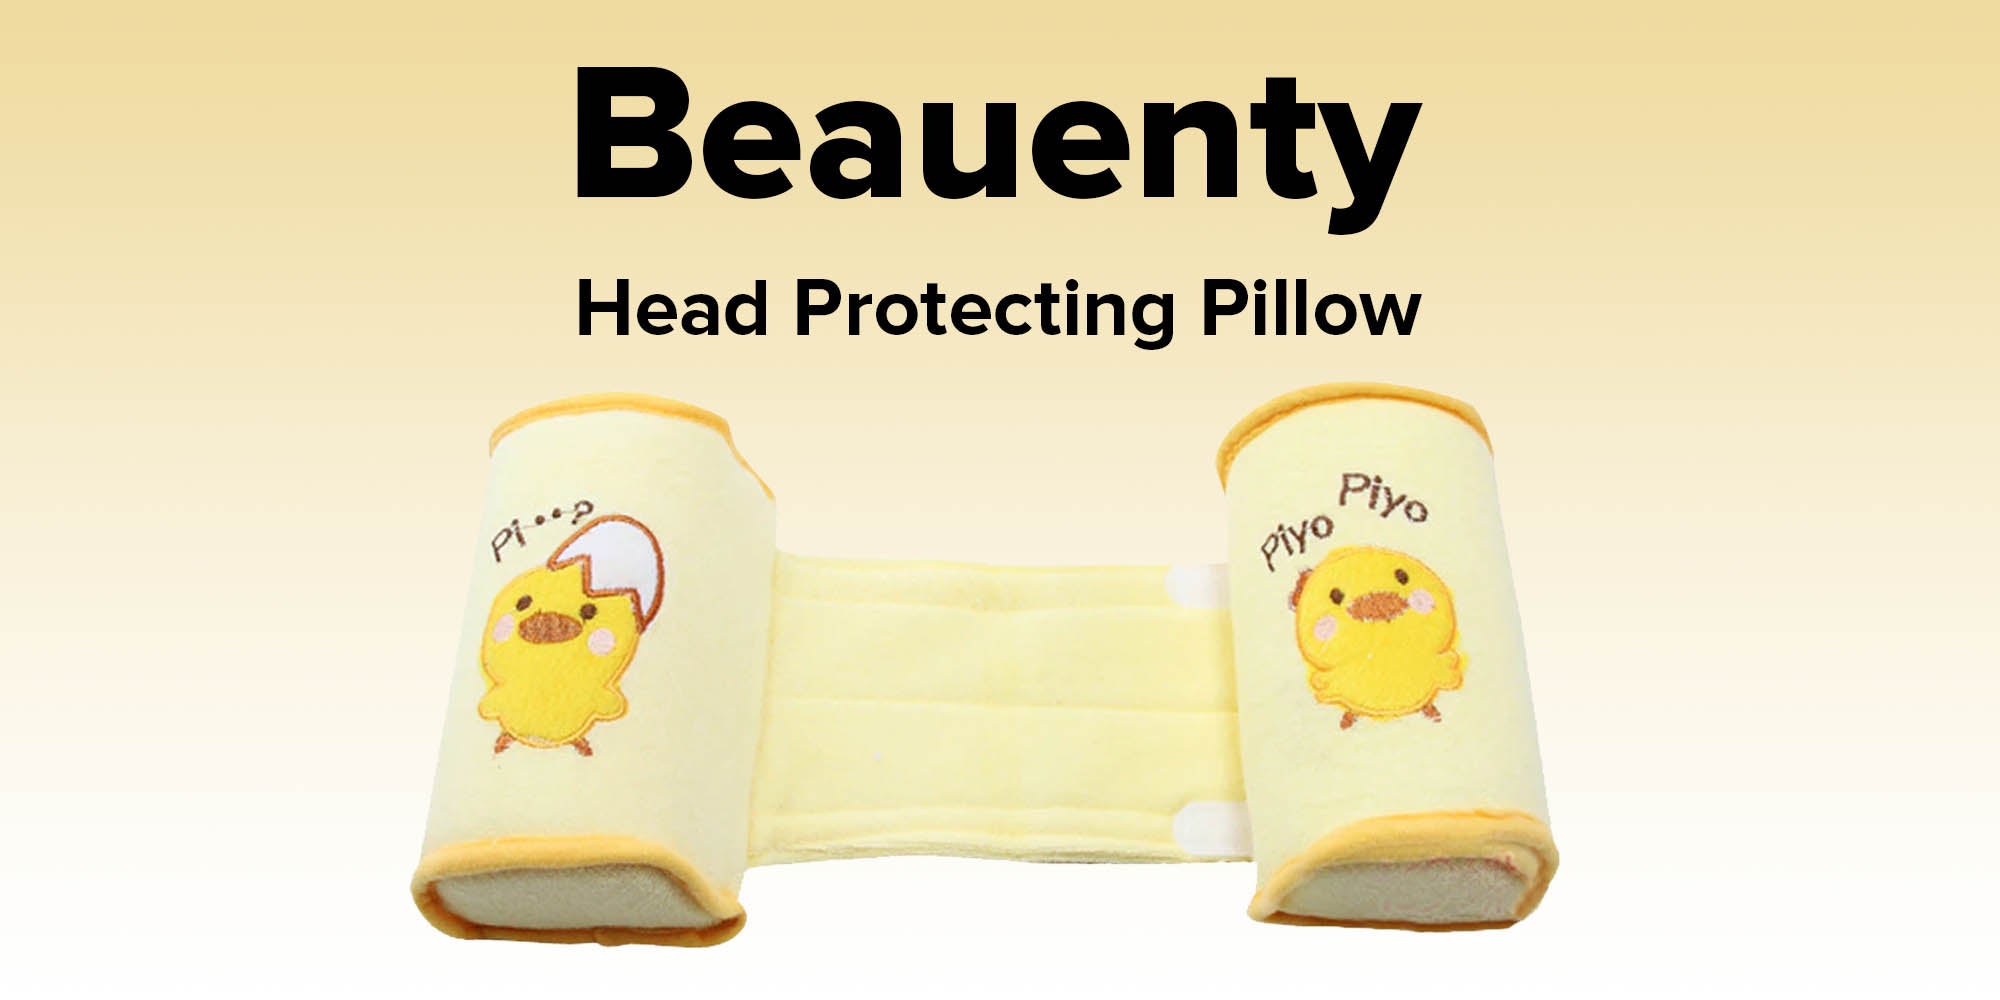 Head Protecting Pillow